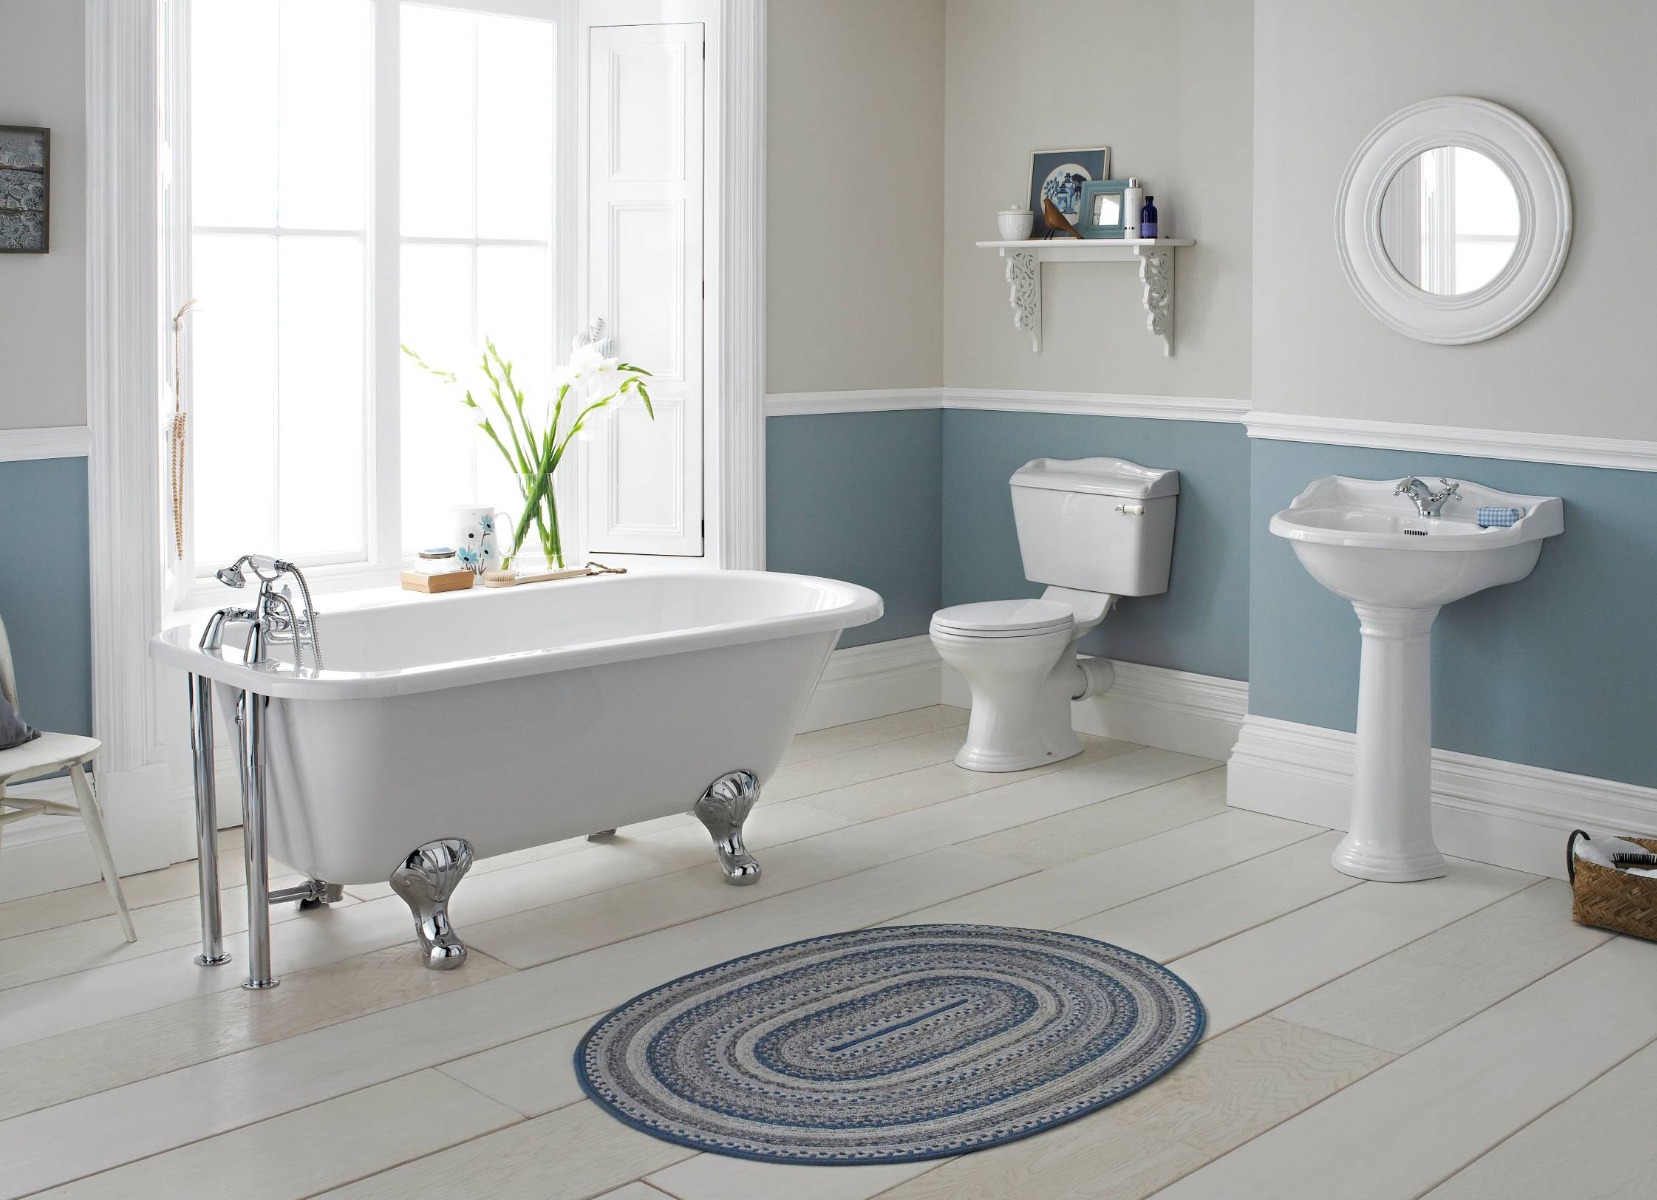 wooden flooring with traditional roll top bath in bathroom